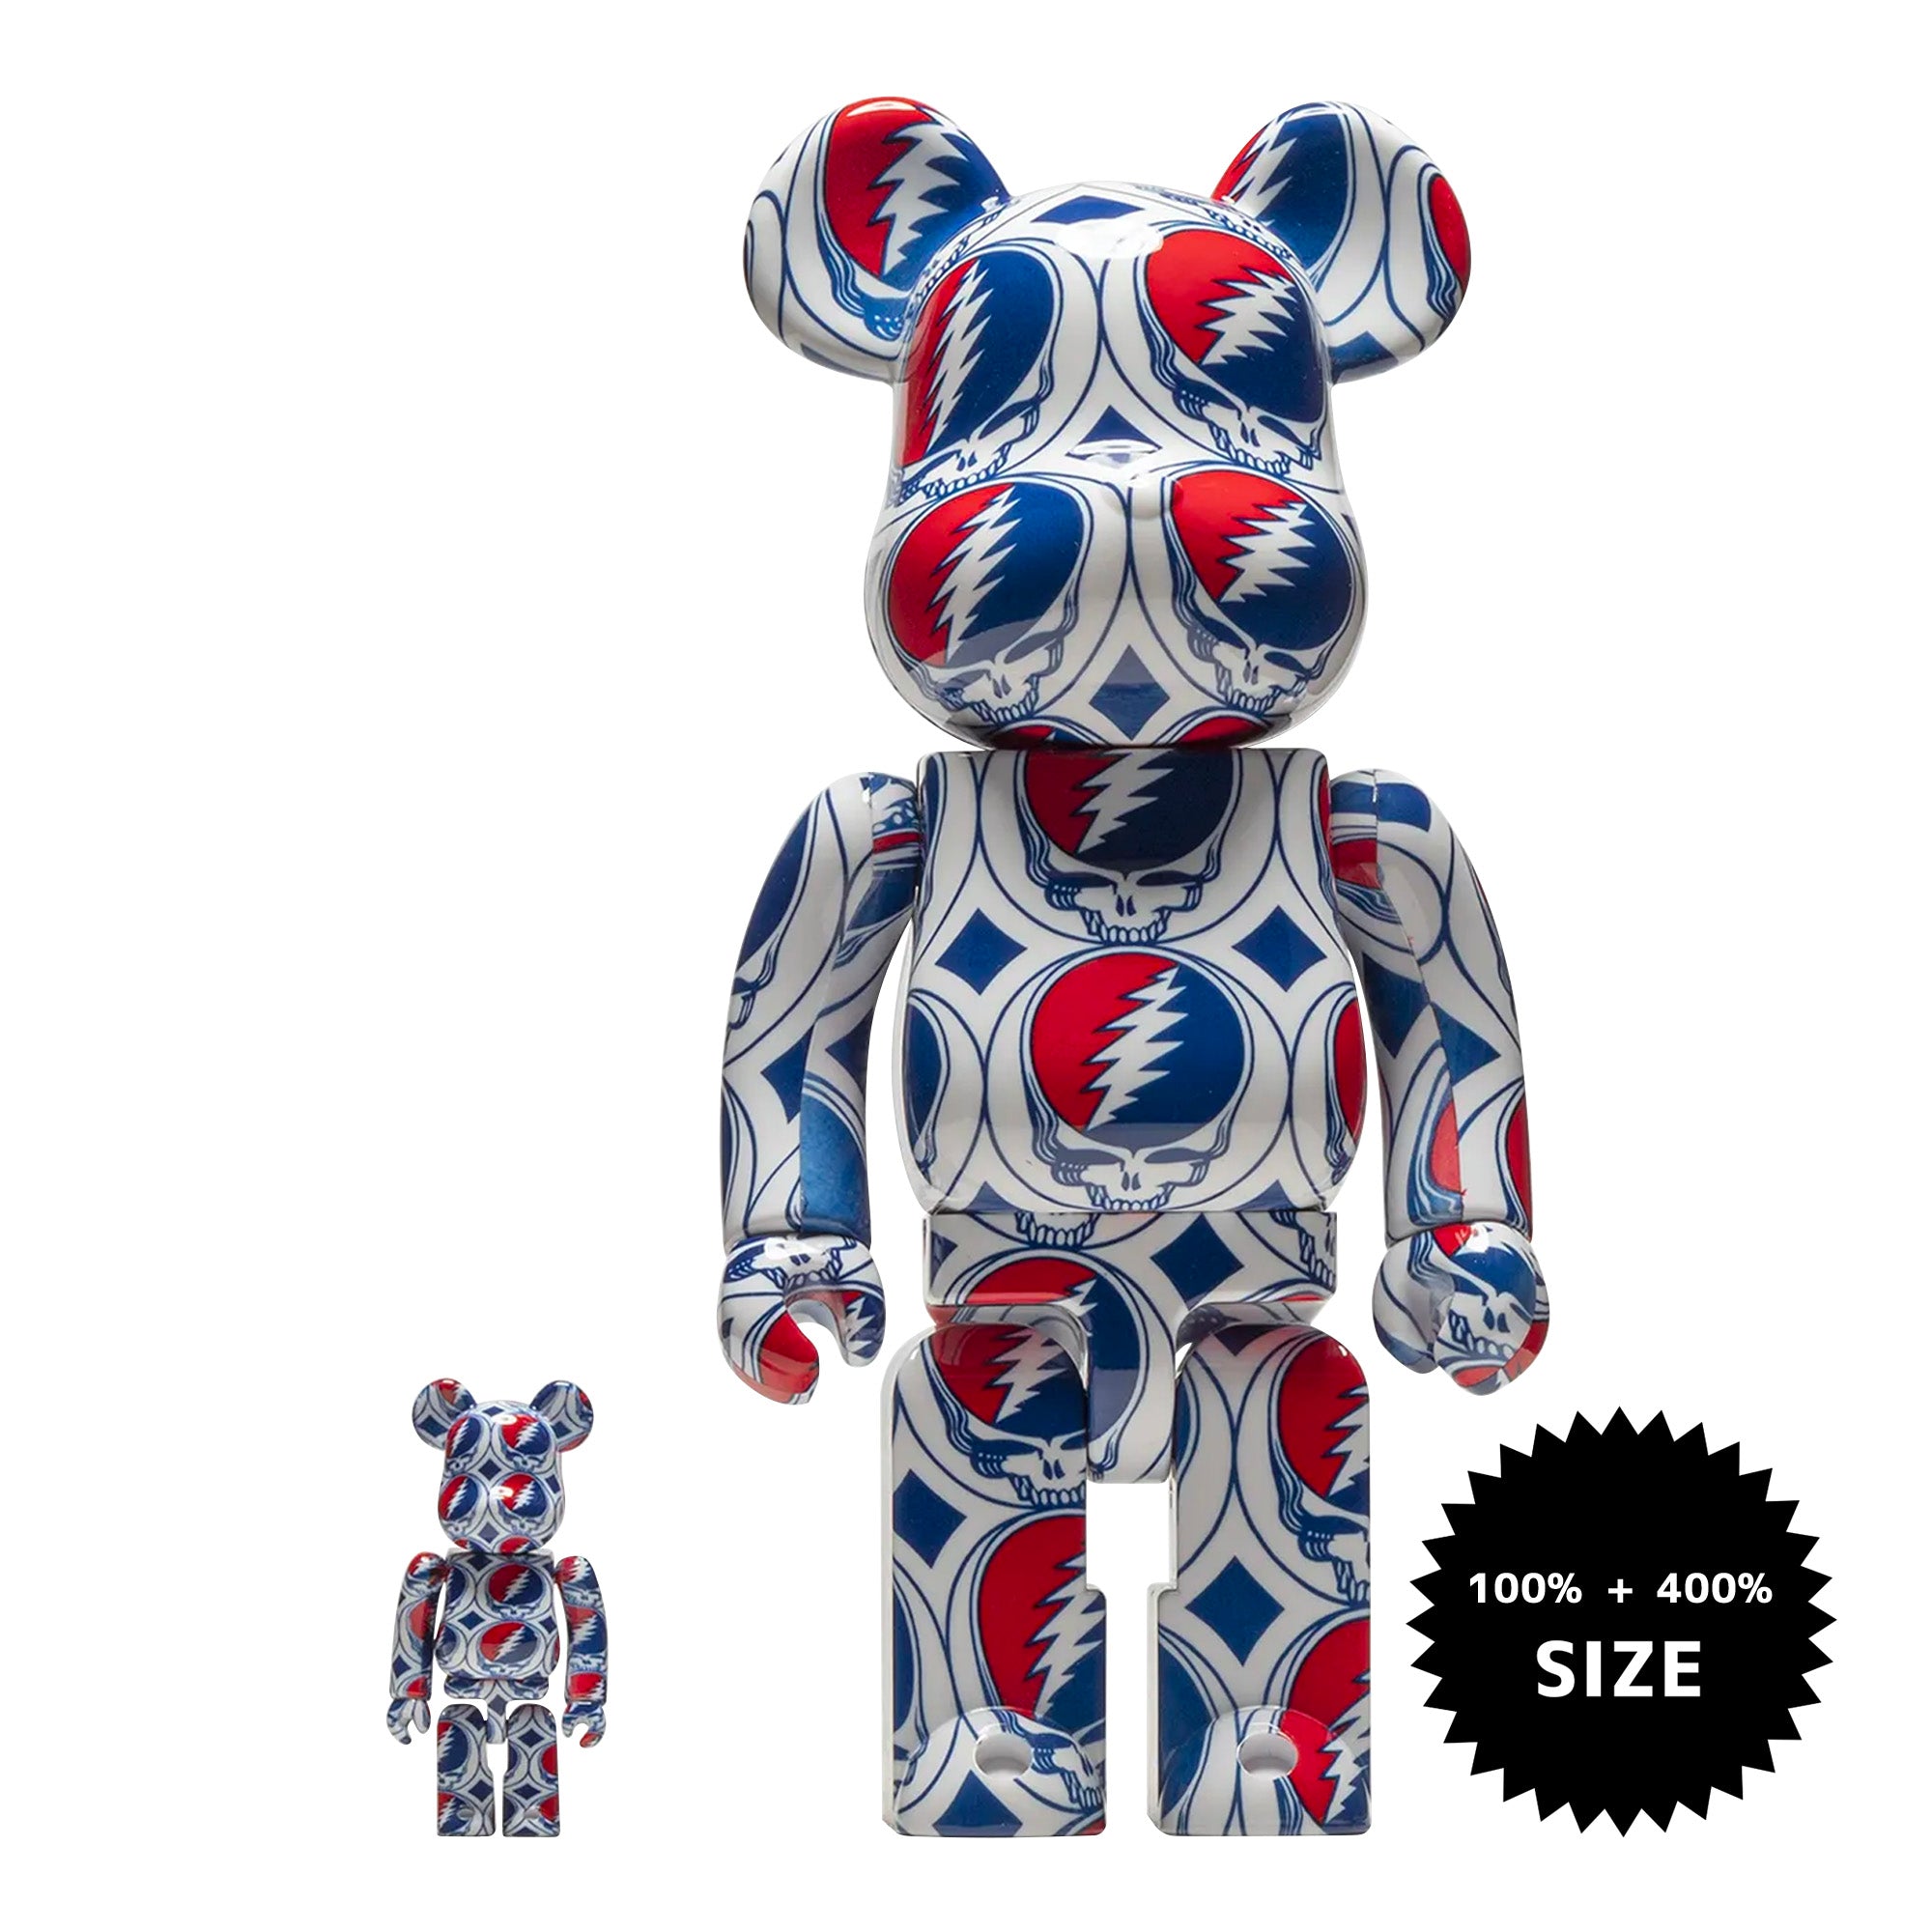 Medicom Be@rbrick: 6 Designs To Brighten Your Day - BAGAHOLICBOY